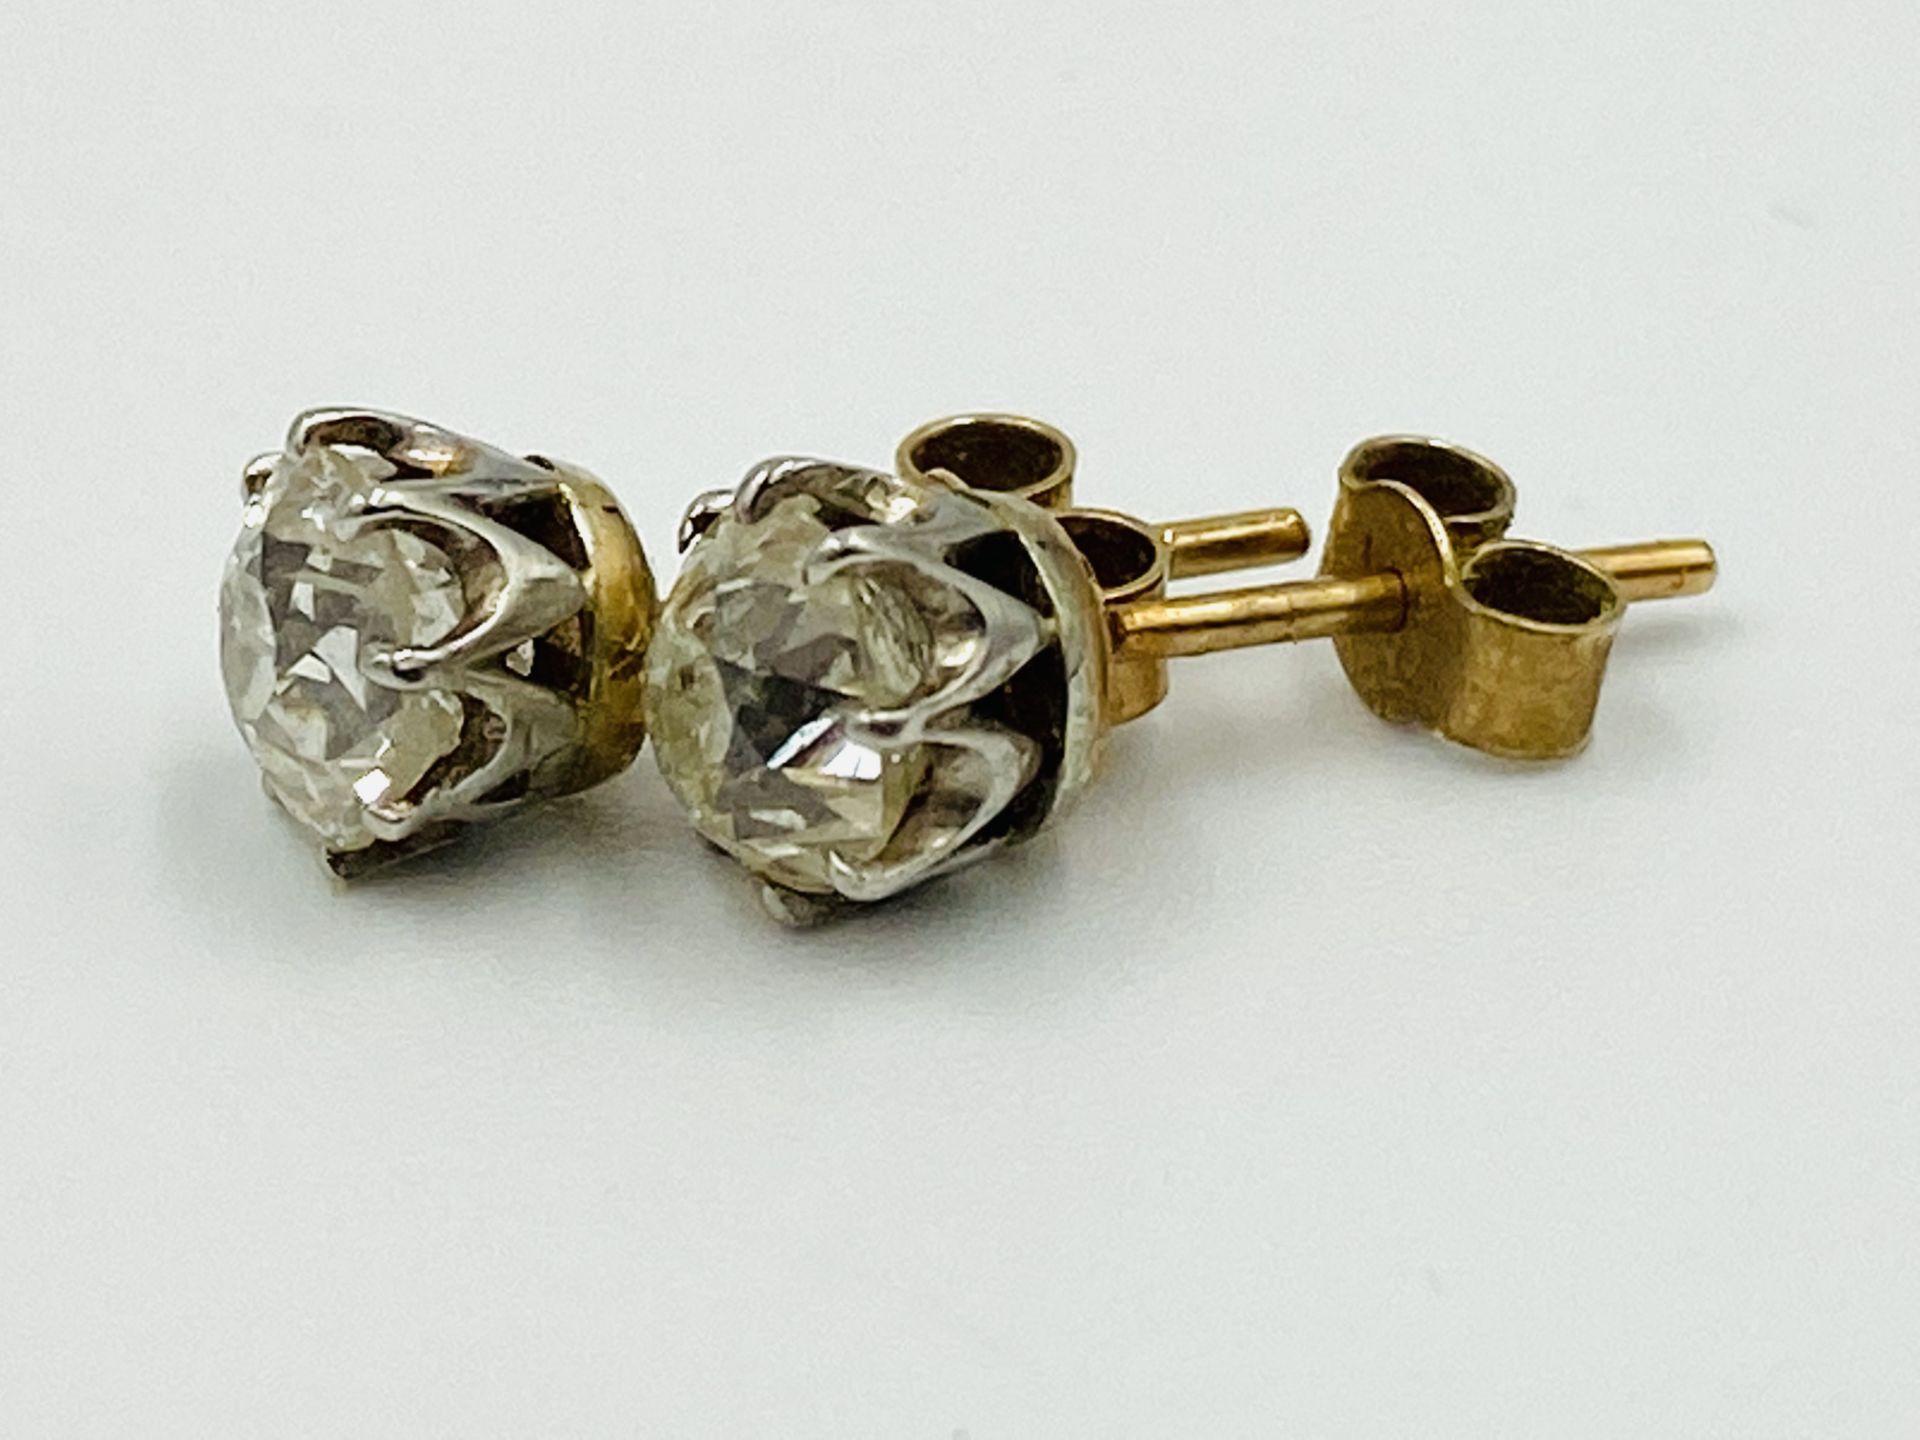 Pair of 9ct gold and diamond earrings - Image 3 of 4